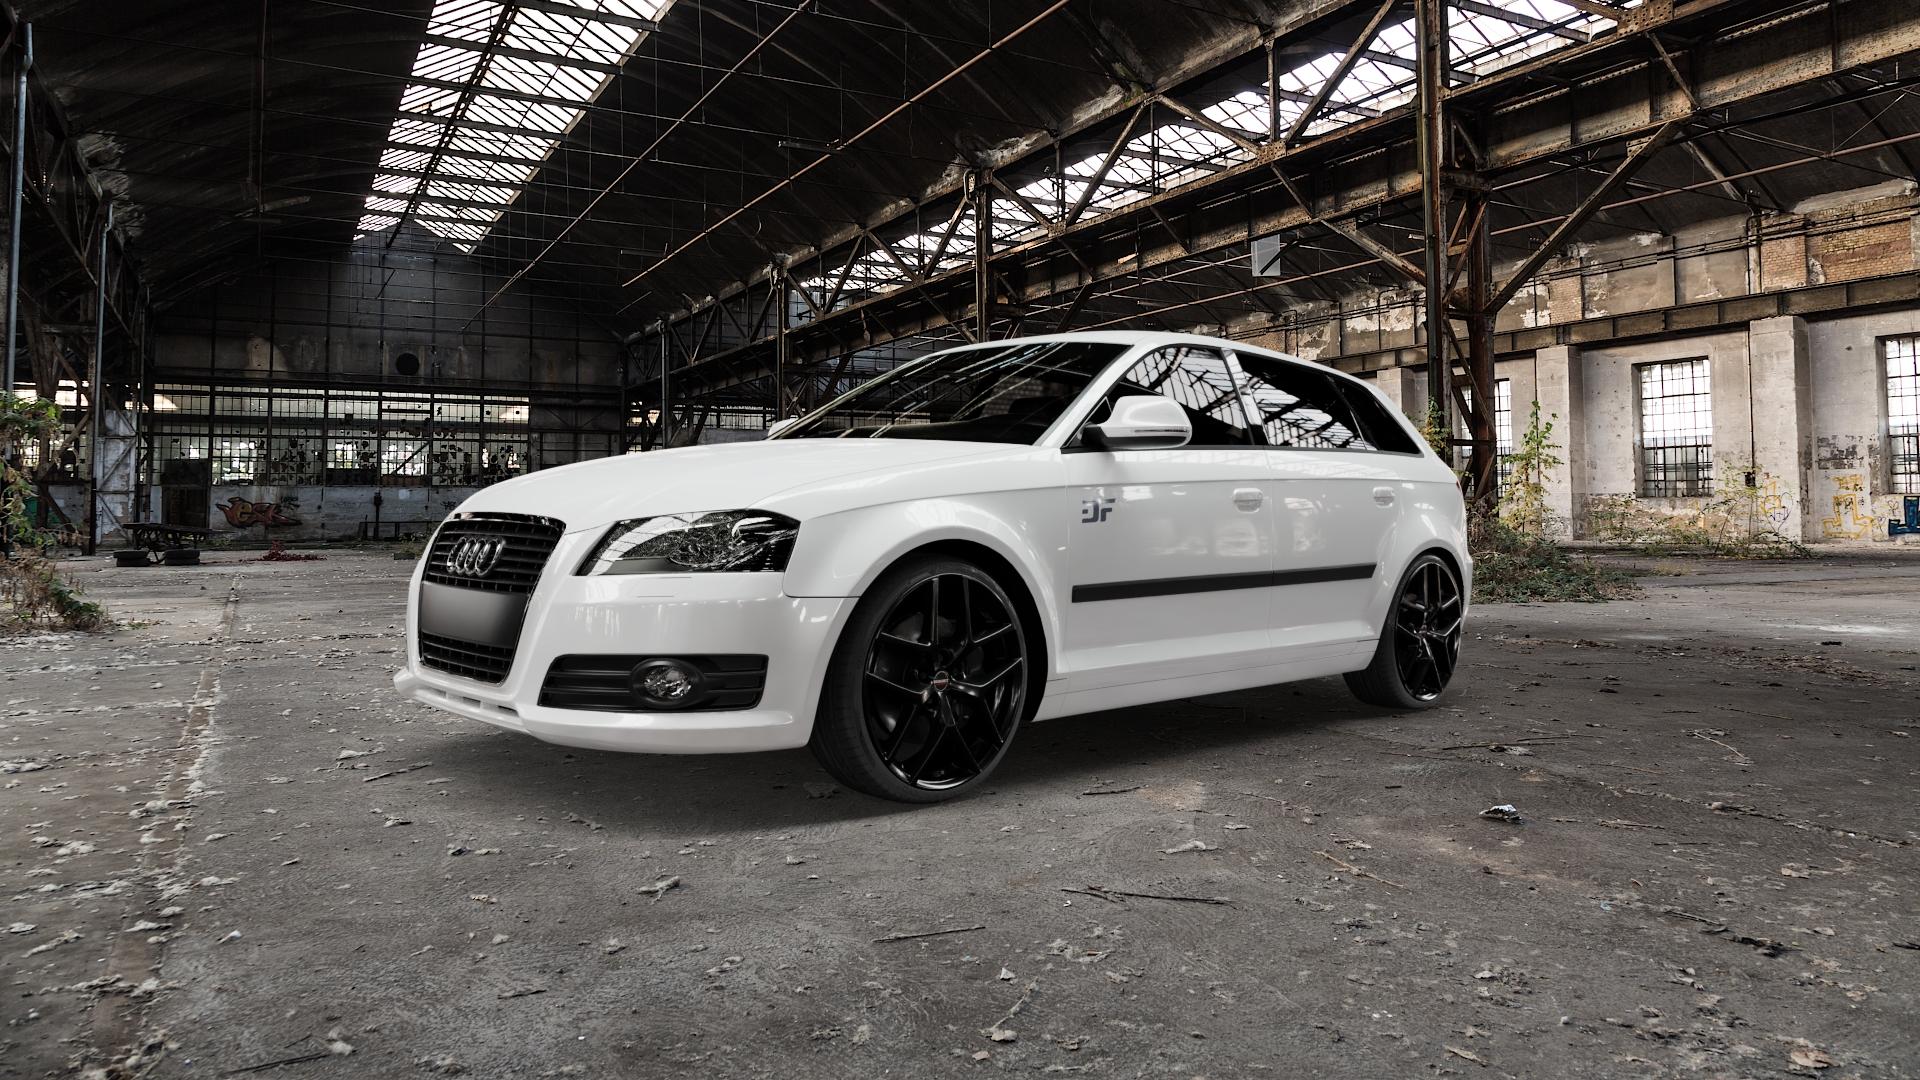 Audi A3 Type 8P 2,0l S3 quattro 188kW (256 hp) Wheels and Tyre Packages |  velonity.com